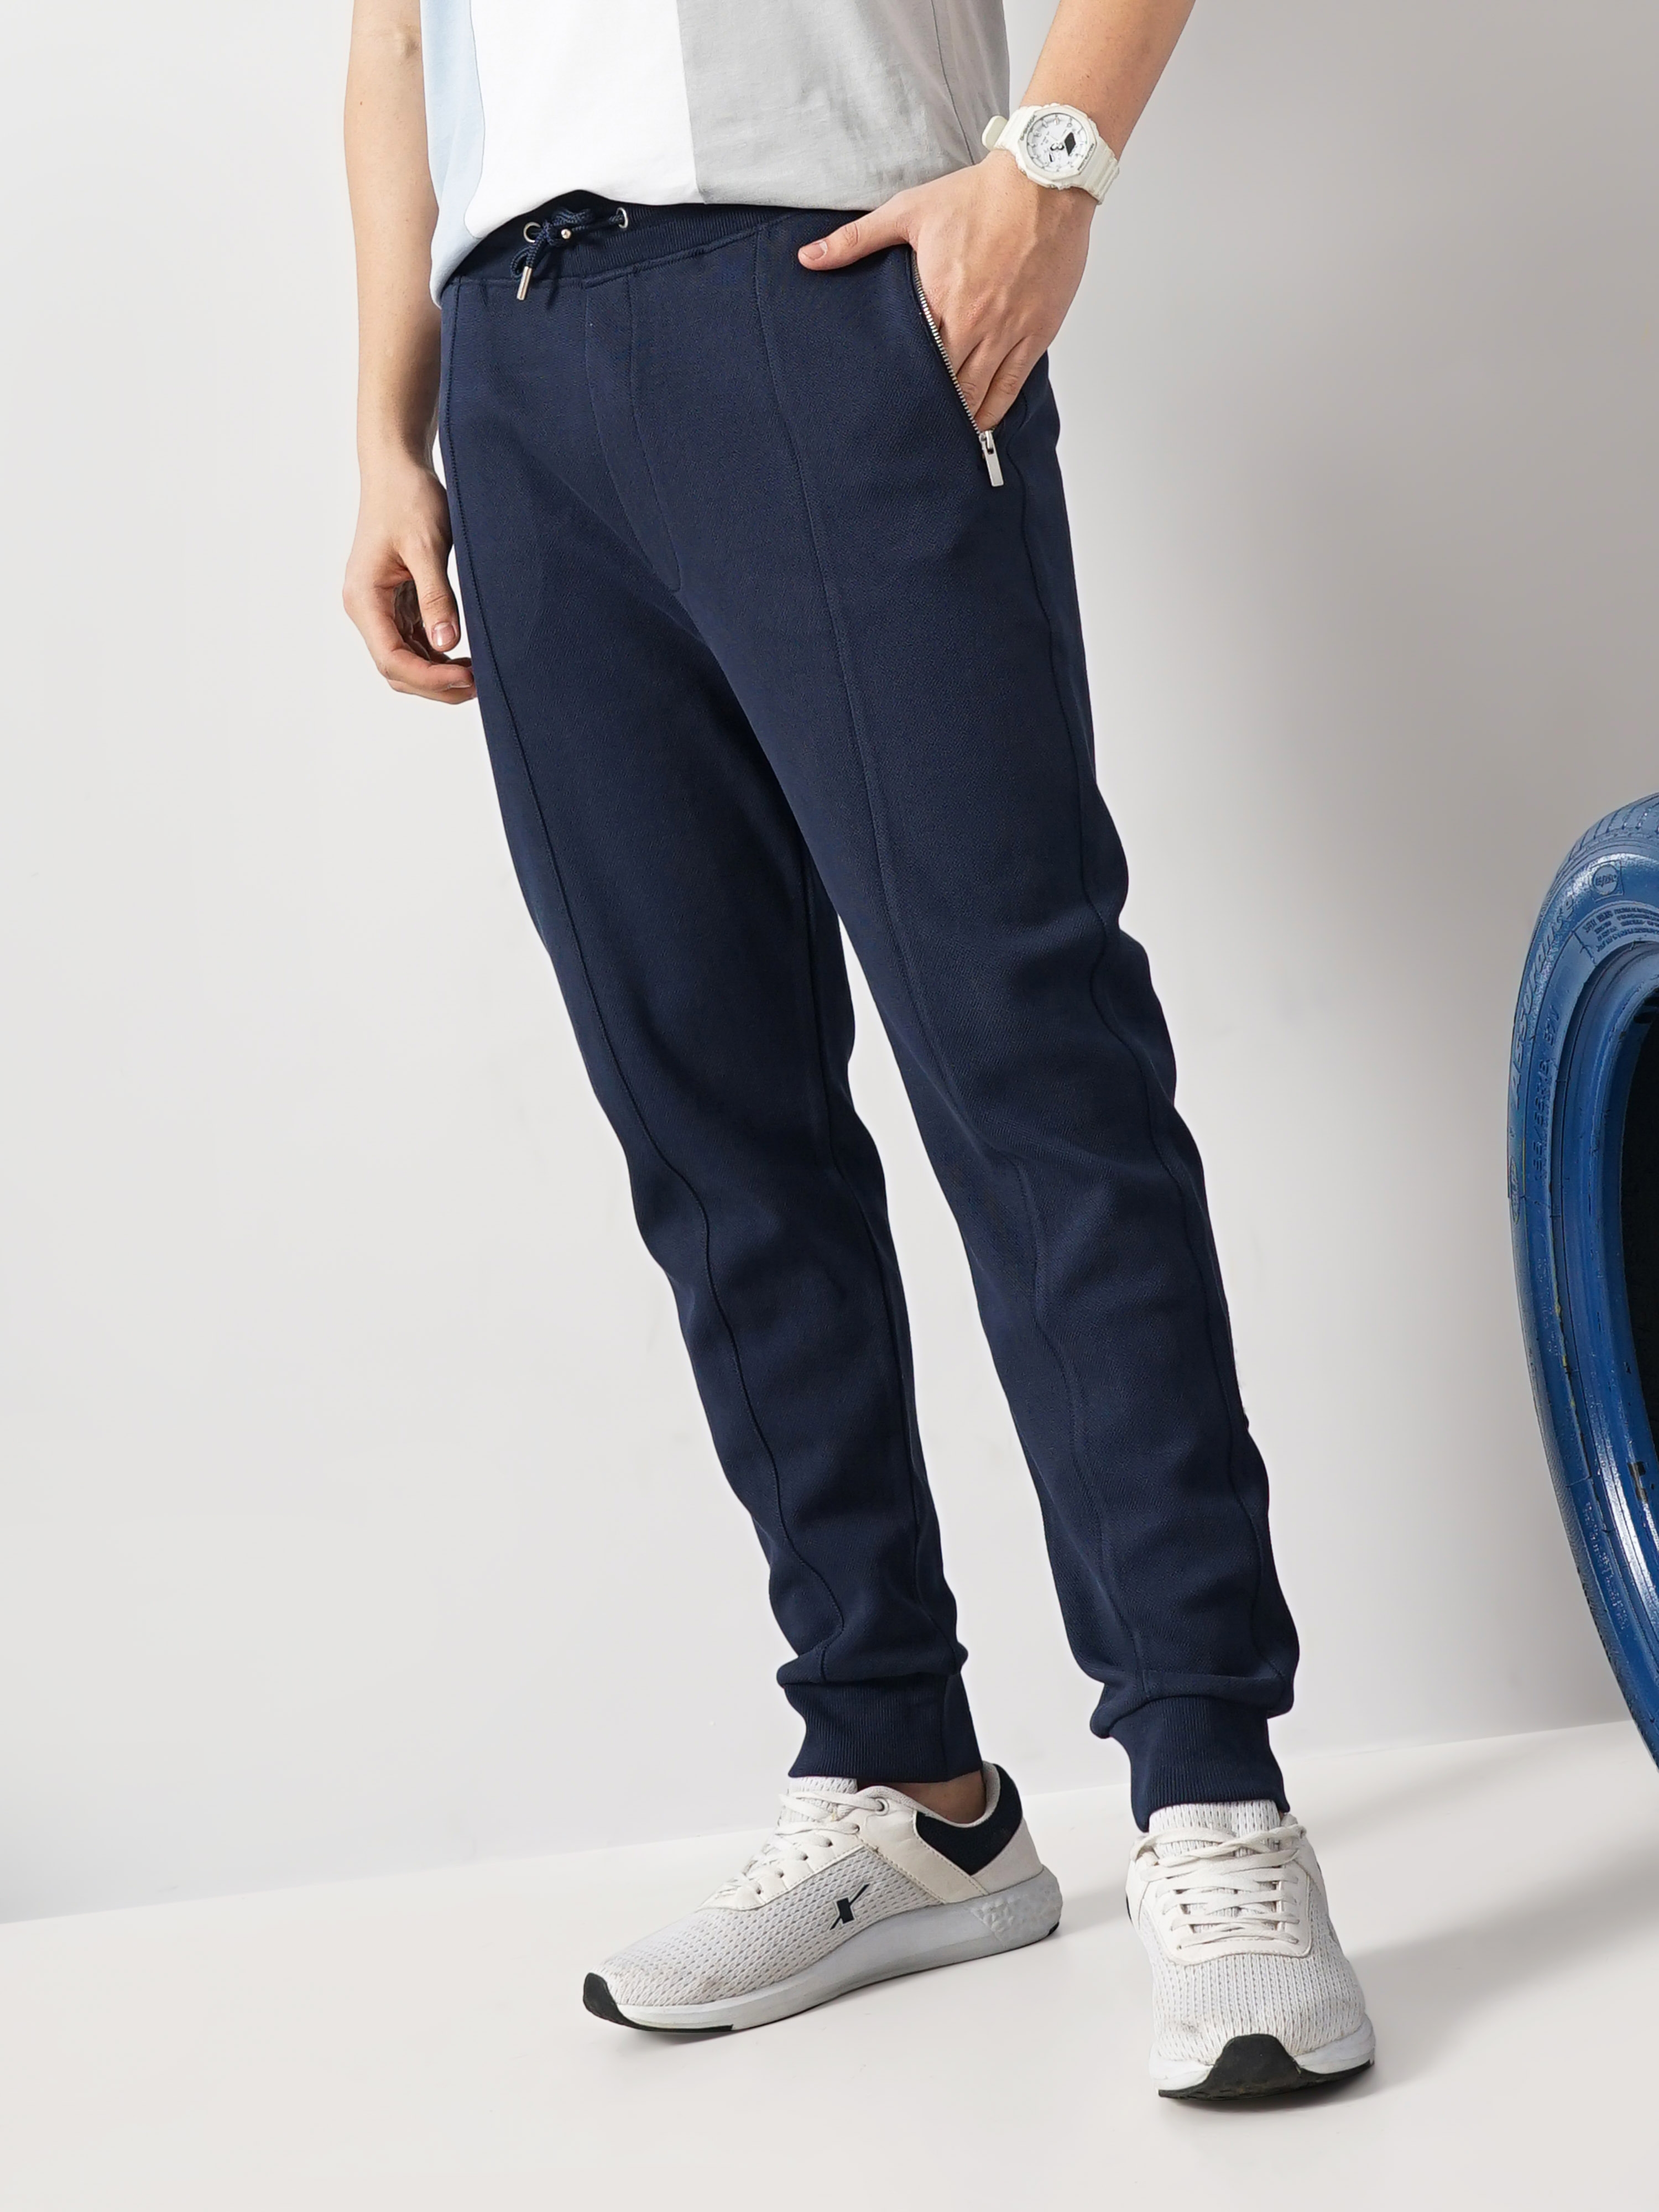 Smart Trousers | Pull On Trousers, Navy | Blake | The Able Label